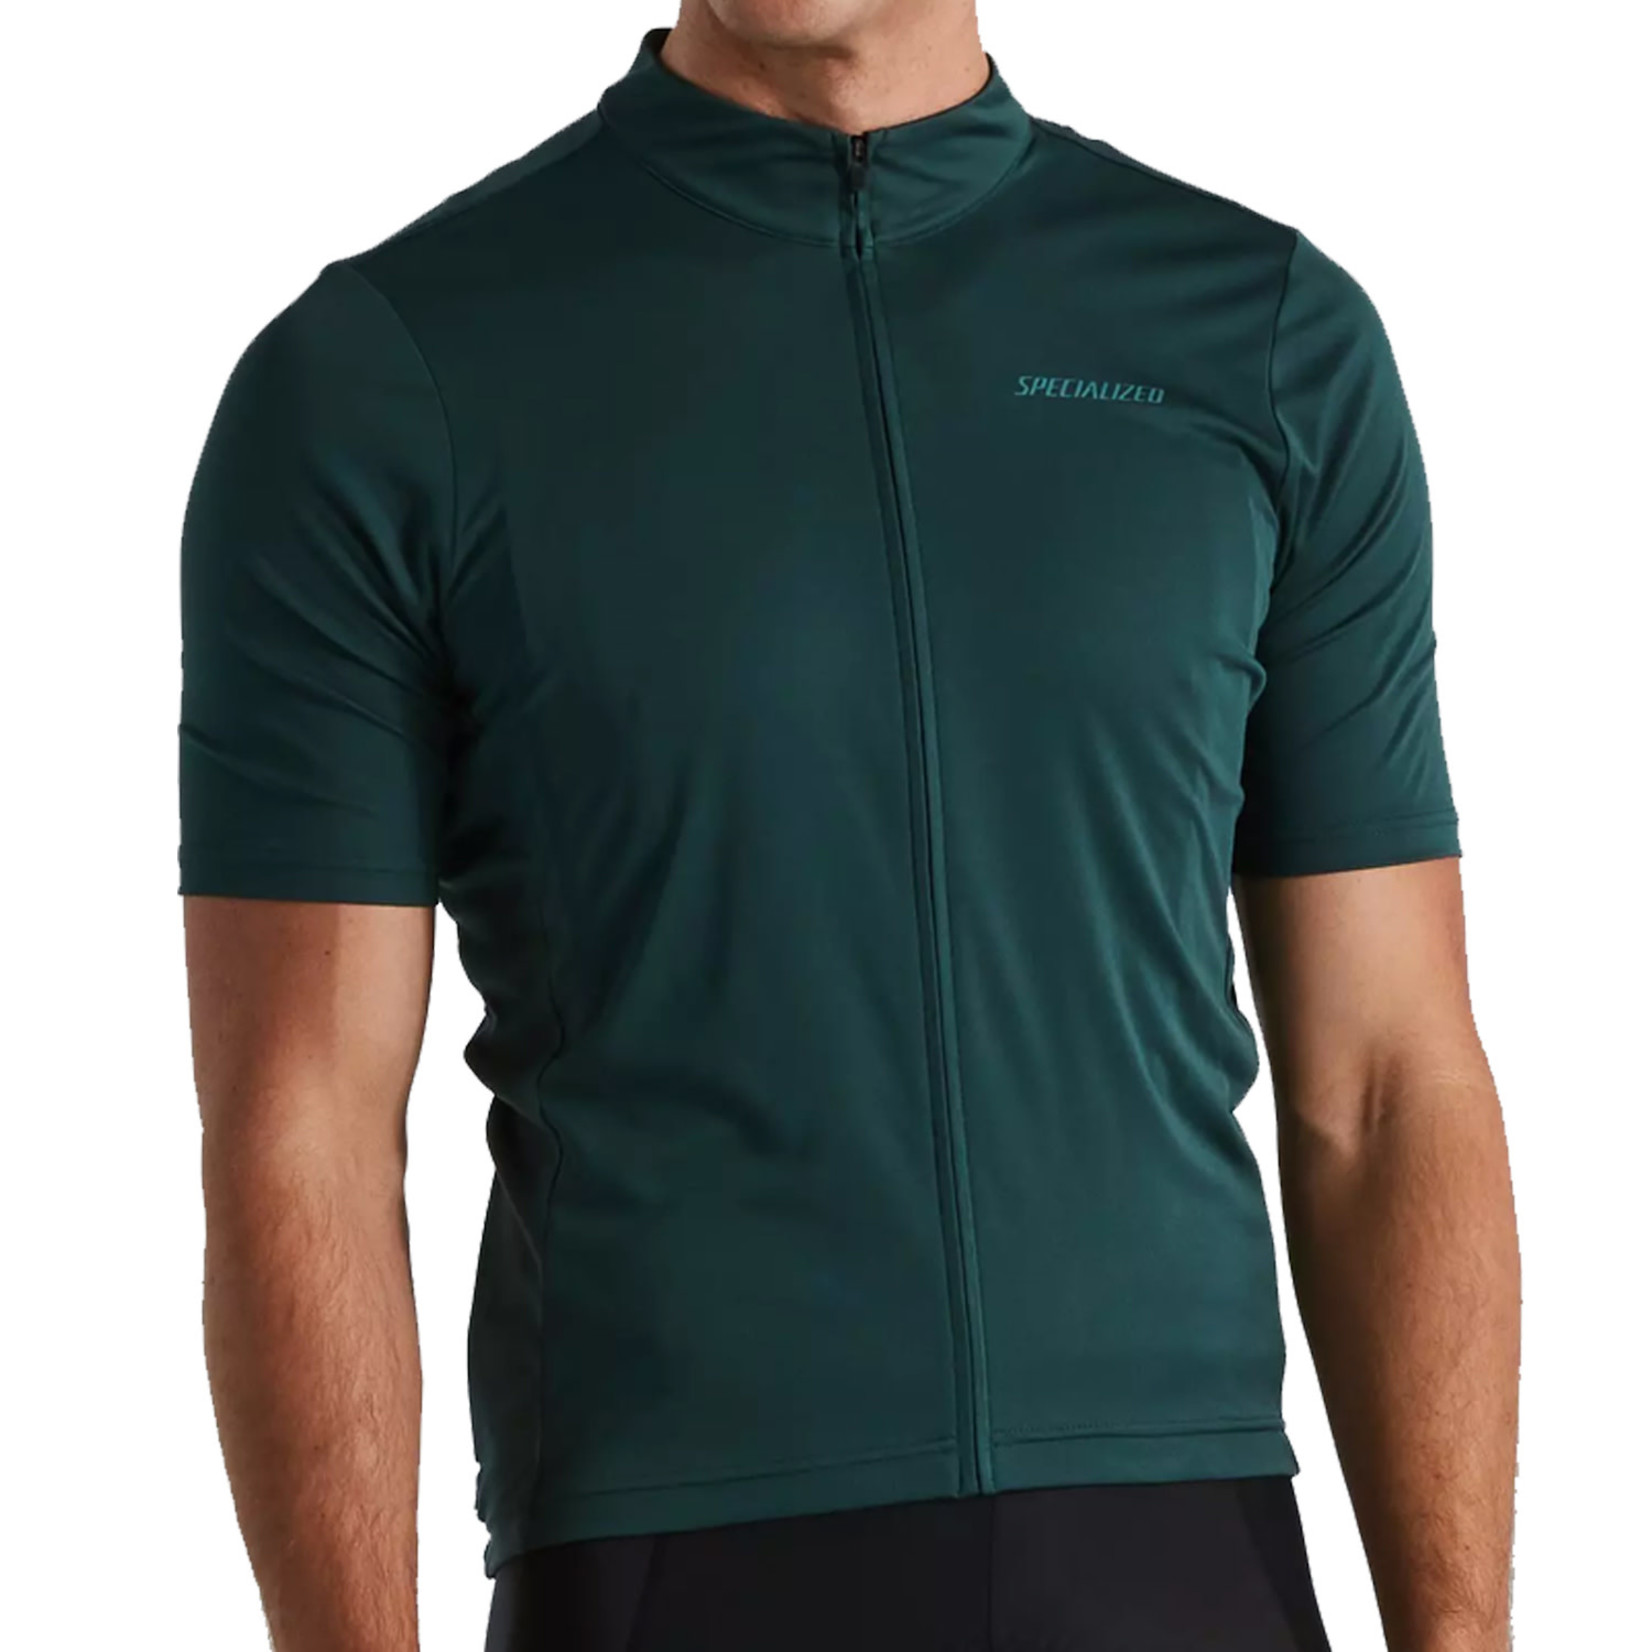 Specialized Jersey Rbx Classic Men